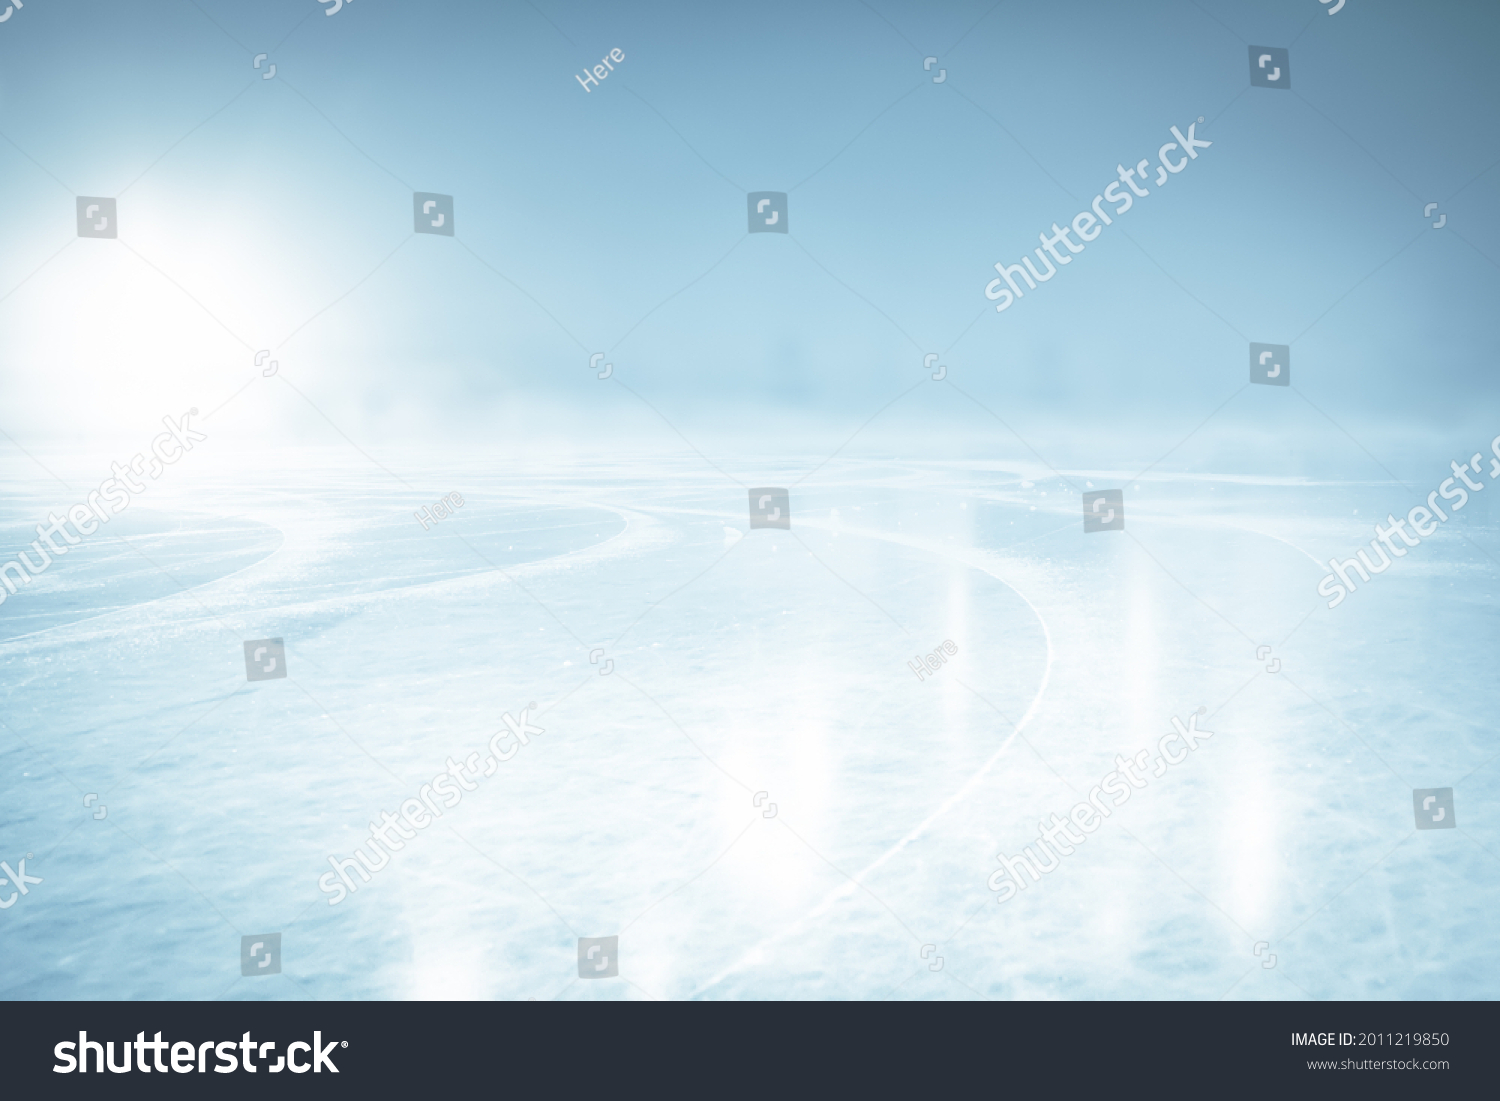 COLD ICE BACKGROUND, BLUE WINTER ICY BACKDROP WITH BLANK SPACE, ICE HOCKEY STADIUM FIELD, GLOWING WINTER BACKDROP FOR MONTAGE FRESH PRODUCTS OR CHRISTMAS PRESENTS #2011219850